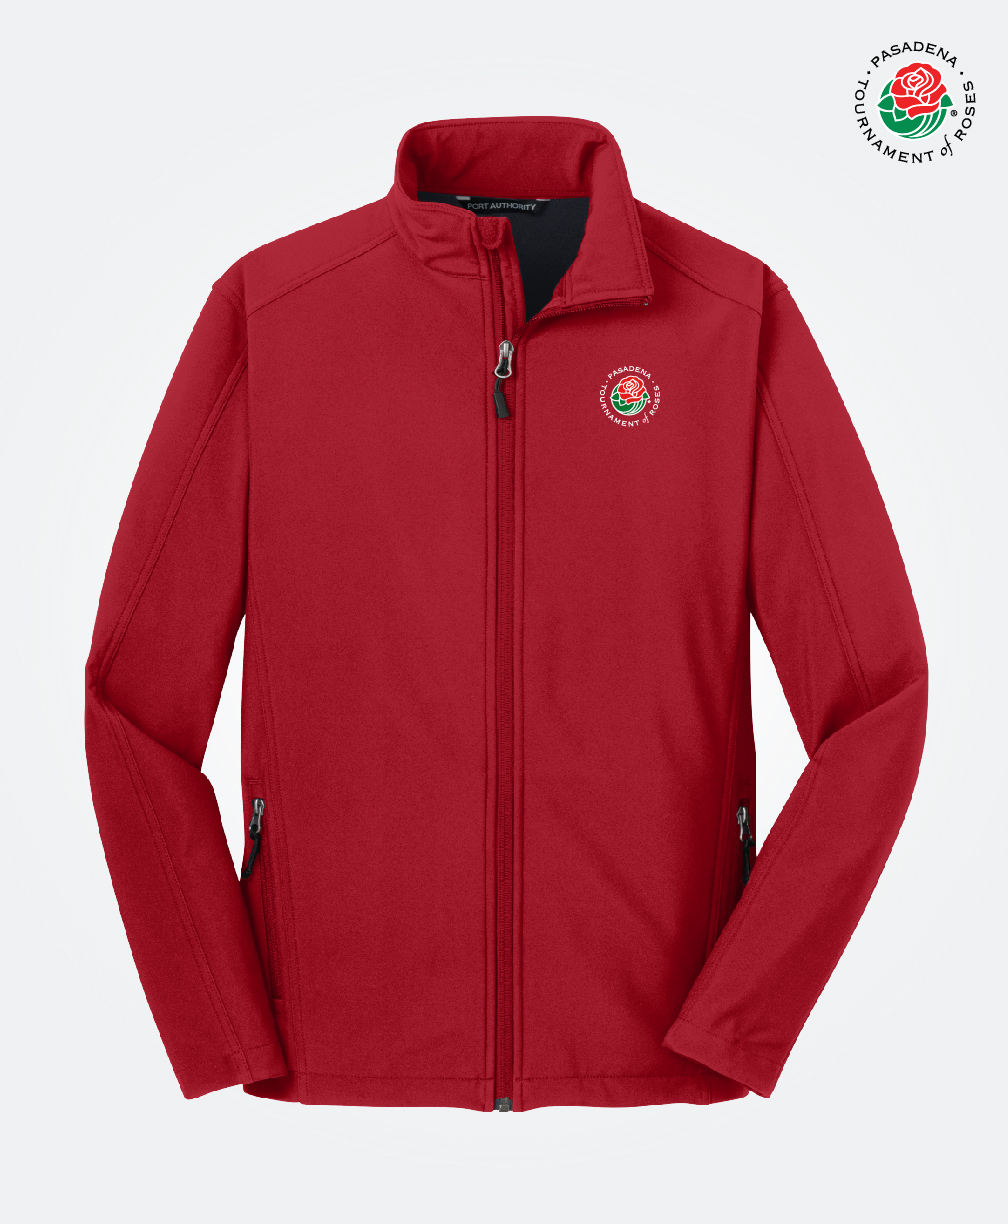 Mens Soft Shell Jacket RED – Shop Tournament of Roses